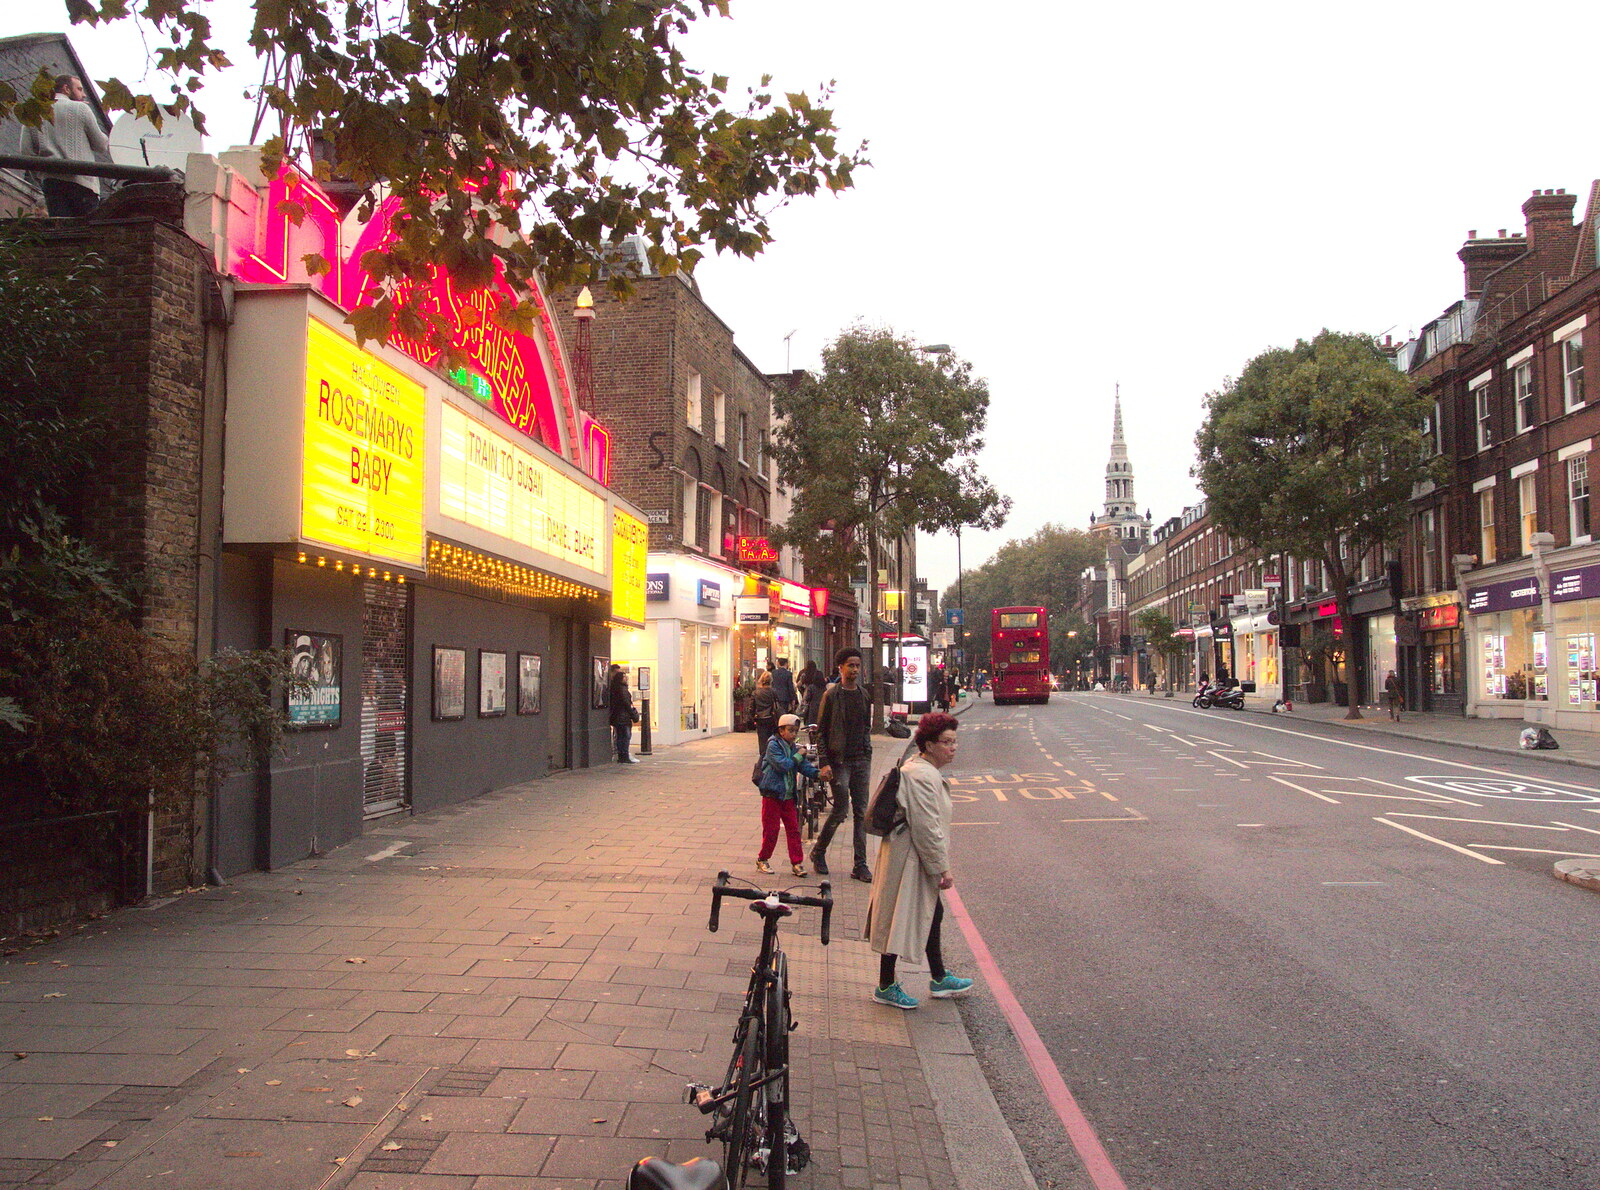 Upper Street in the evening from Droidcon 2016, Islington, London - 27th October 2016